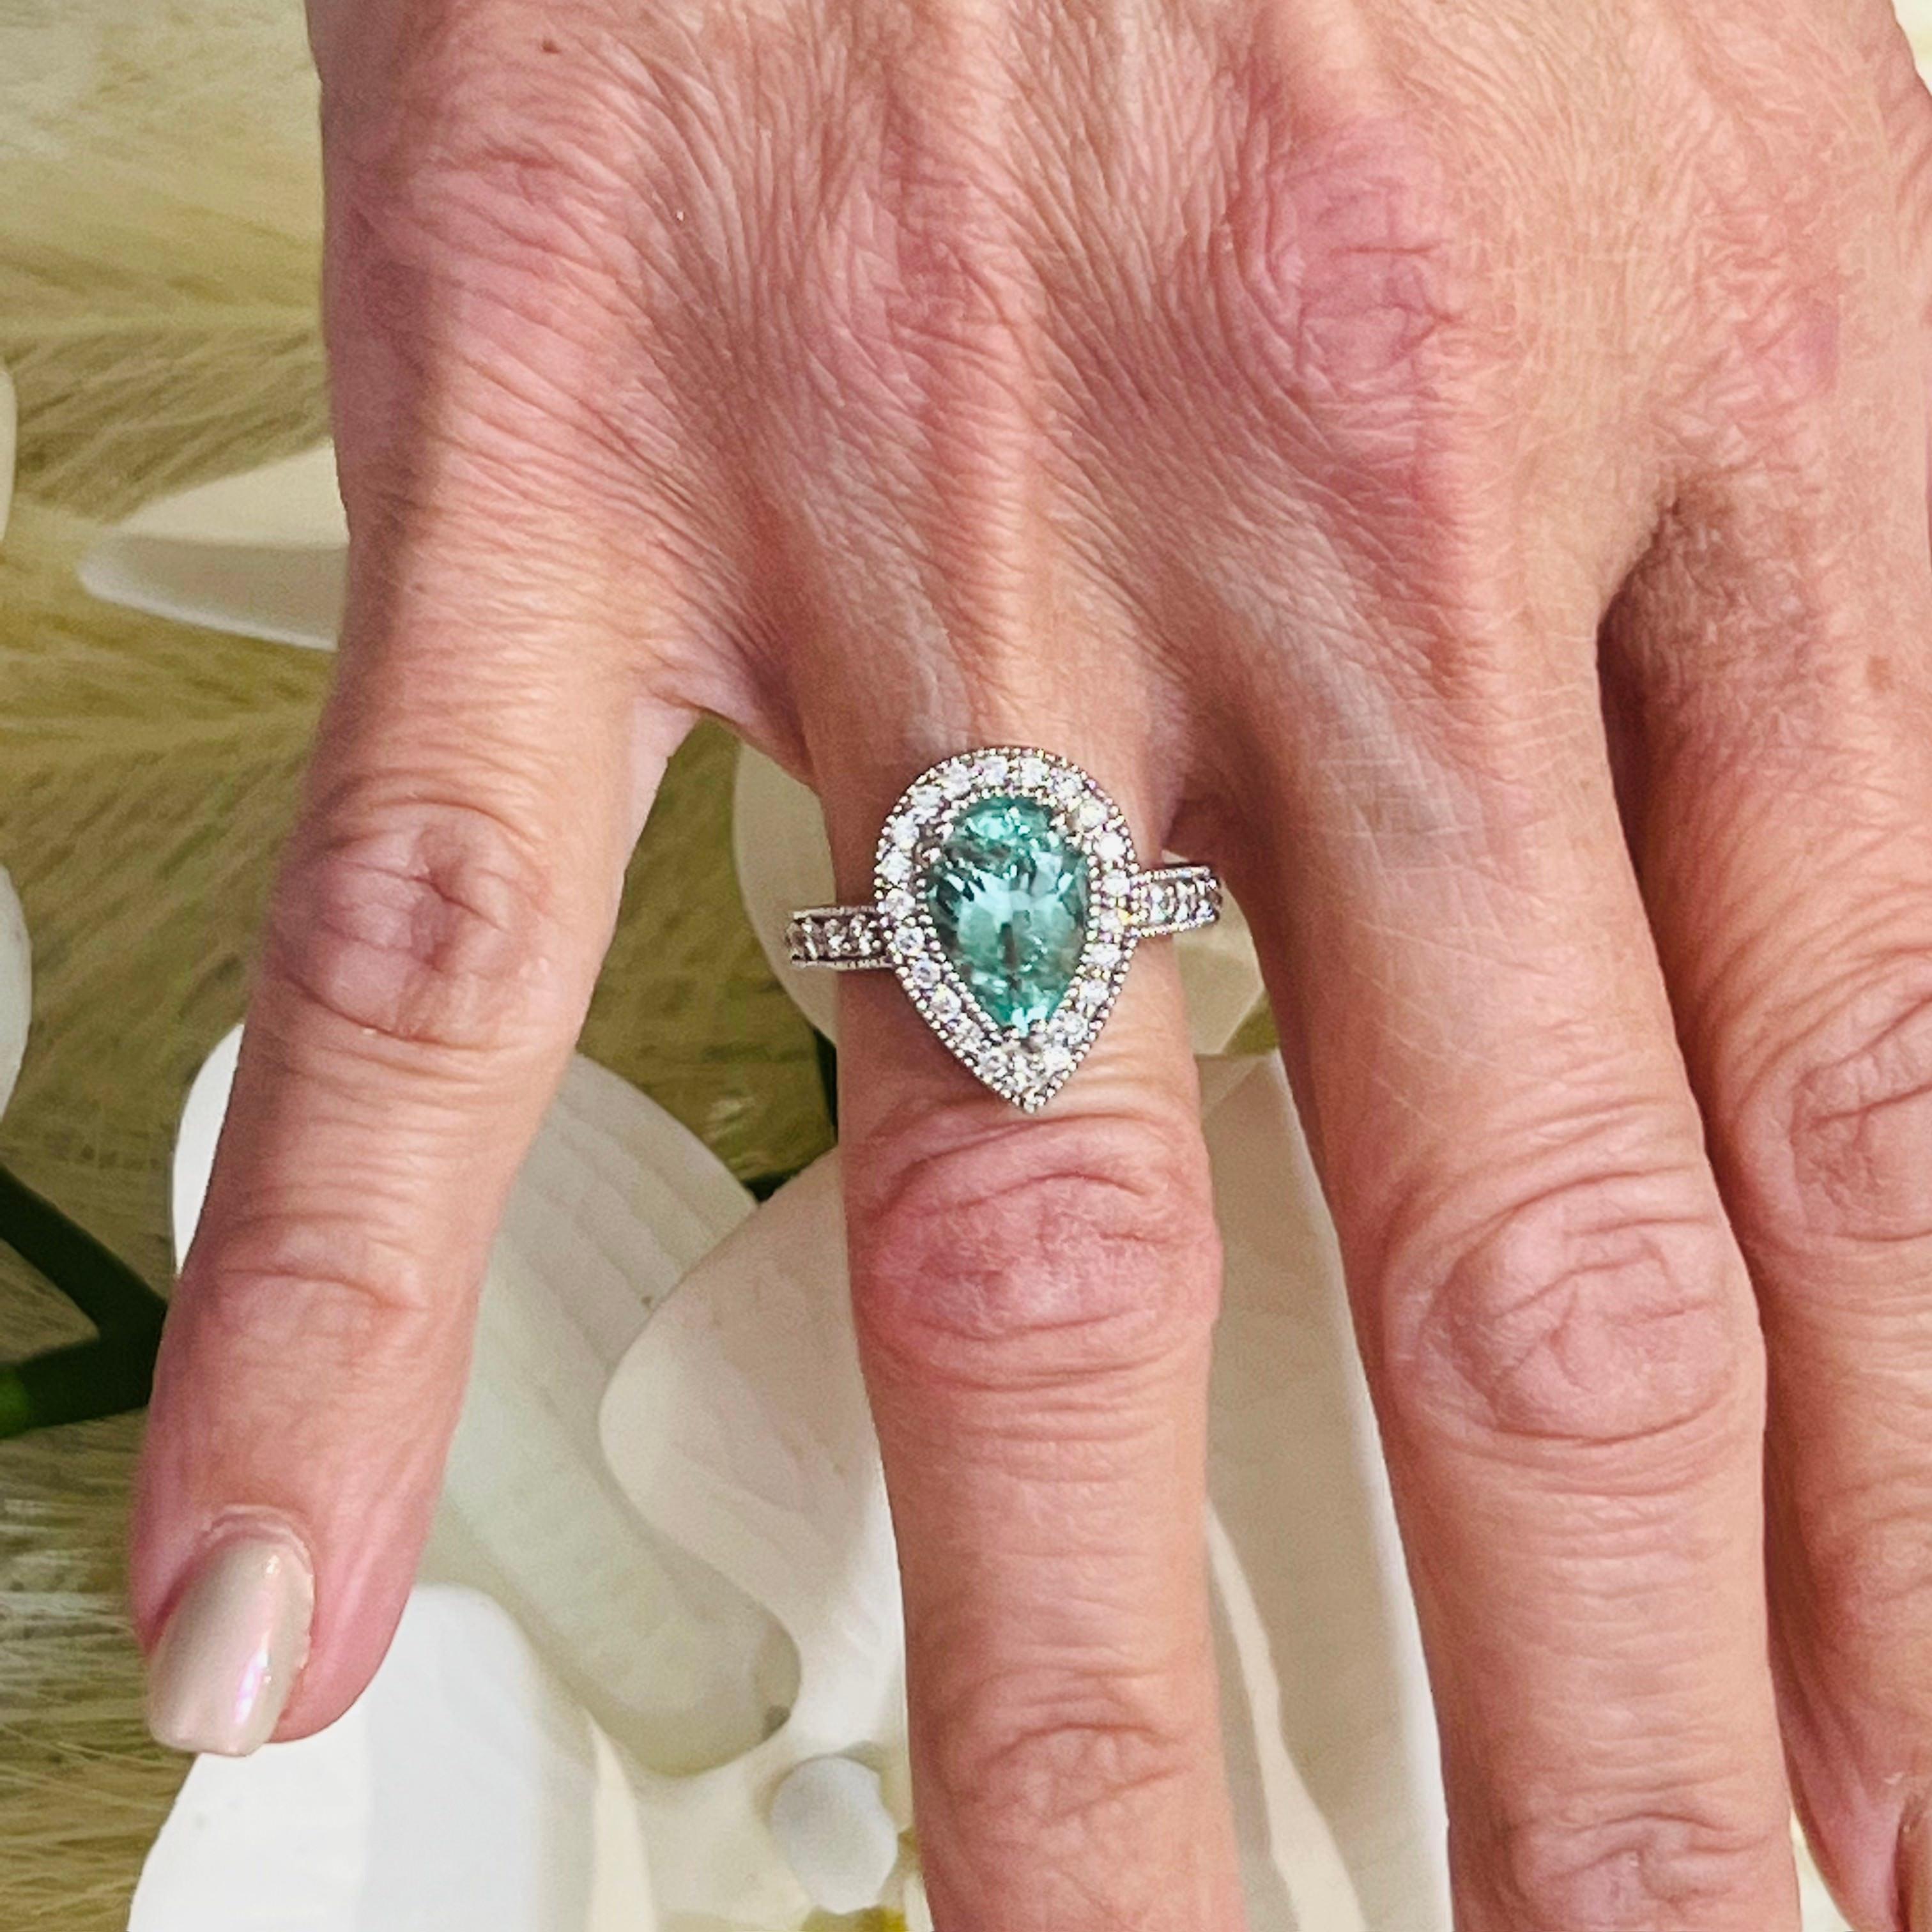 Natural Colombian Emerald Diamond Ring Size 6.5 14k W Gold 3.27 TCW Certified $7,950 216675

Nothing says, “I Love you” more than Diamonds and Pearls!

This Emerald ring has been Certified, Inspected, and Appraised by Gemological Appraisal